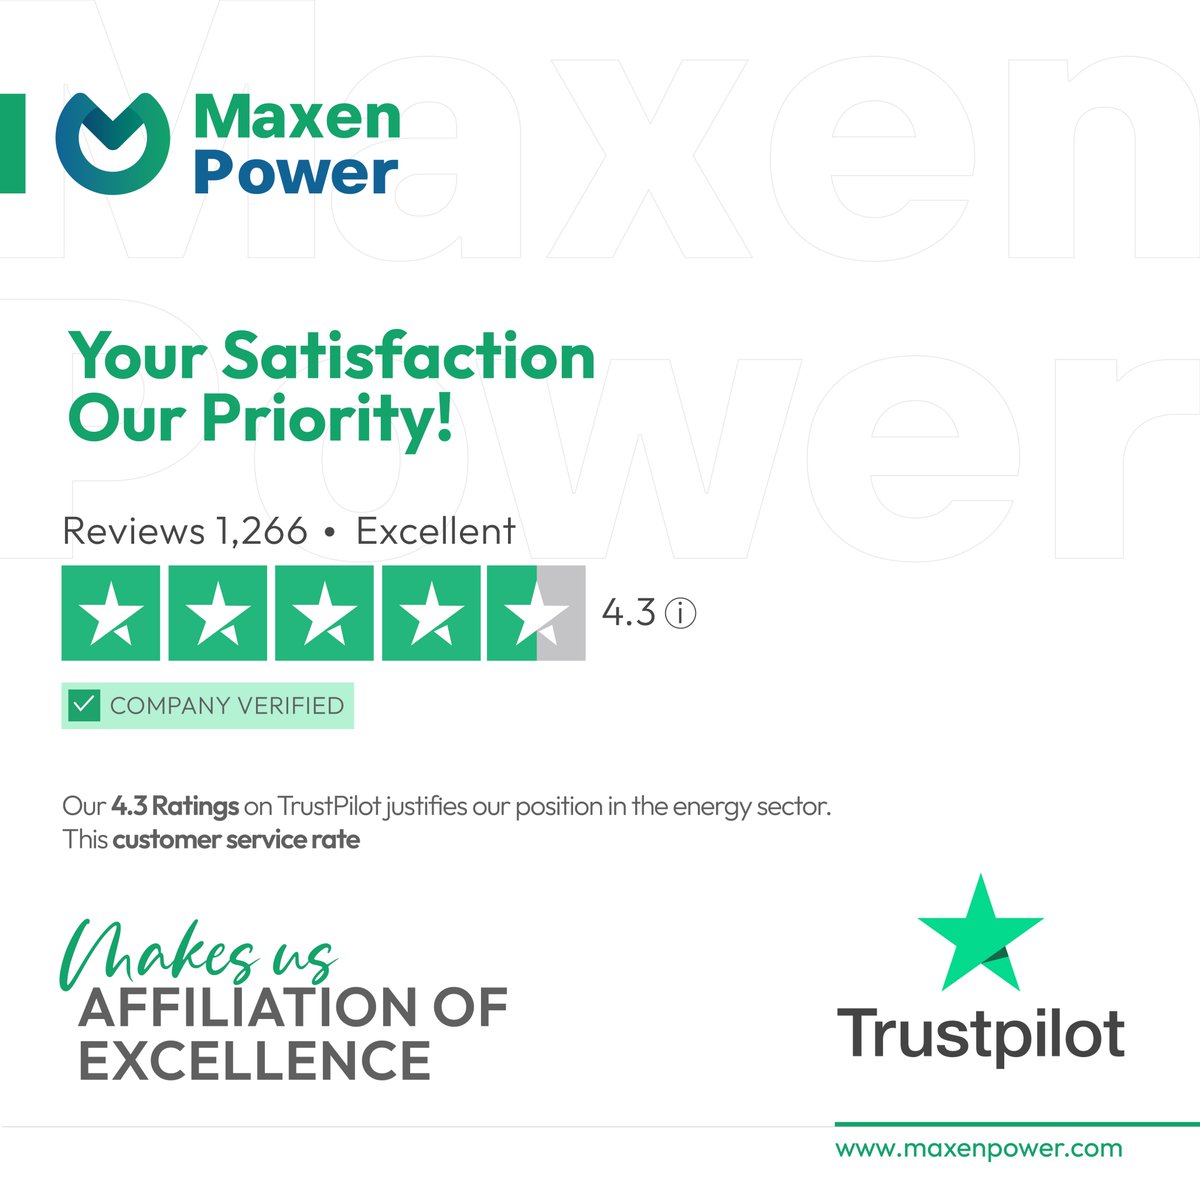 Proud to have a 4.3 power rating on TrustPilot, the testament of our unwavering commitment to excellence. Count on us as we prioritise your satisfaction throughout the process.

#MaxenPower #EnergisingBusinesses #CustomerServiceExcellence